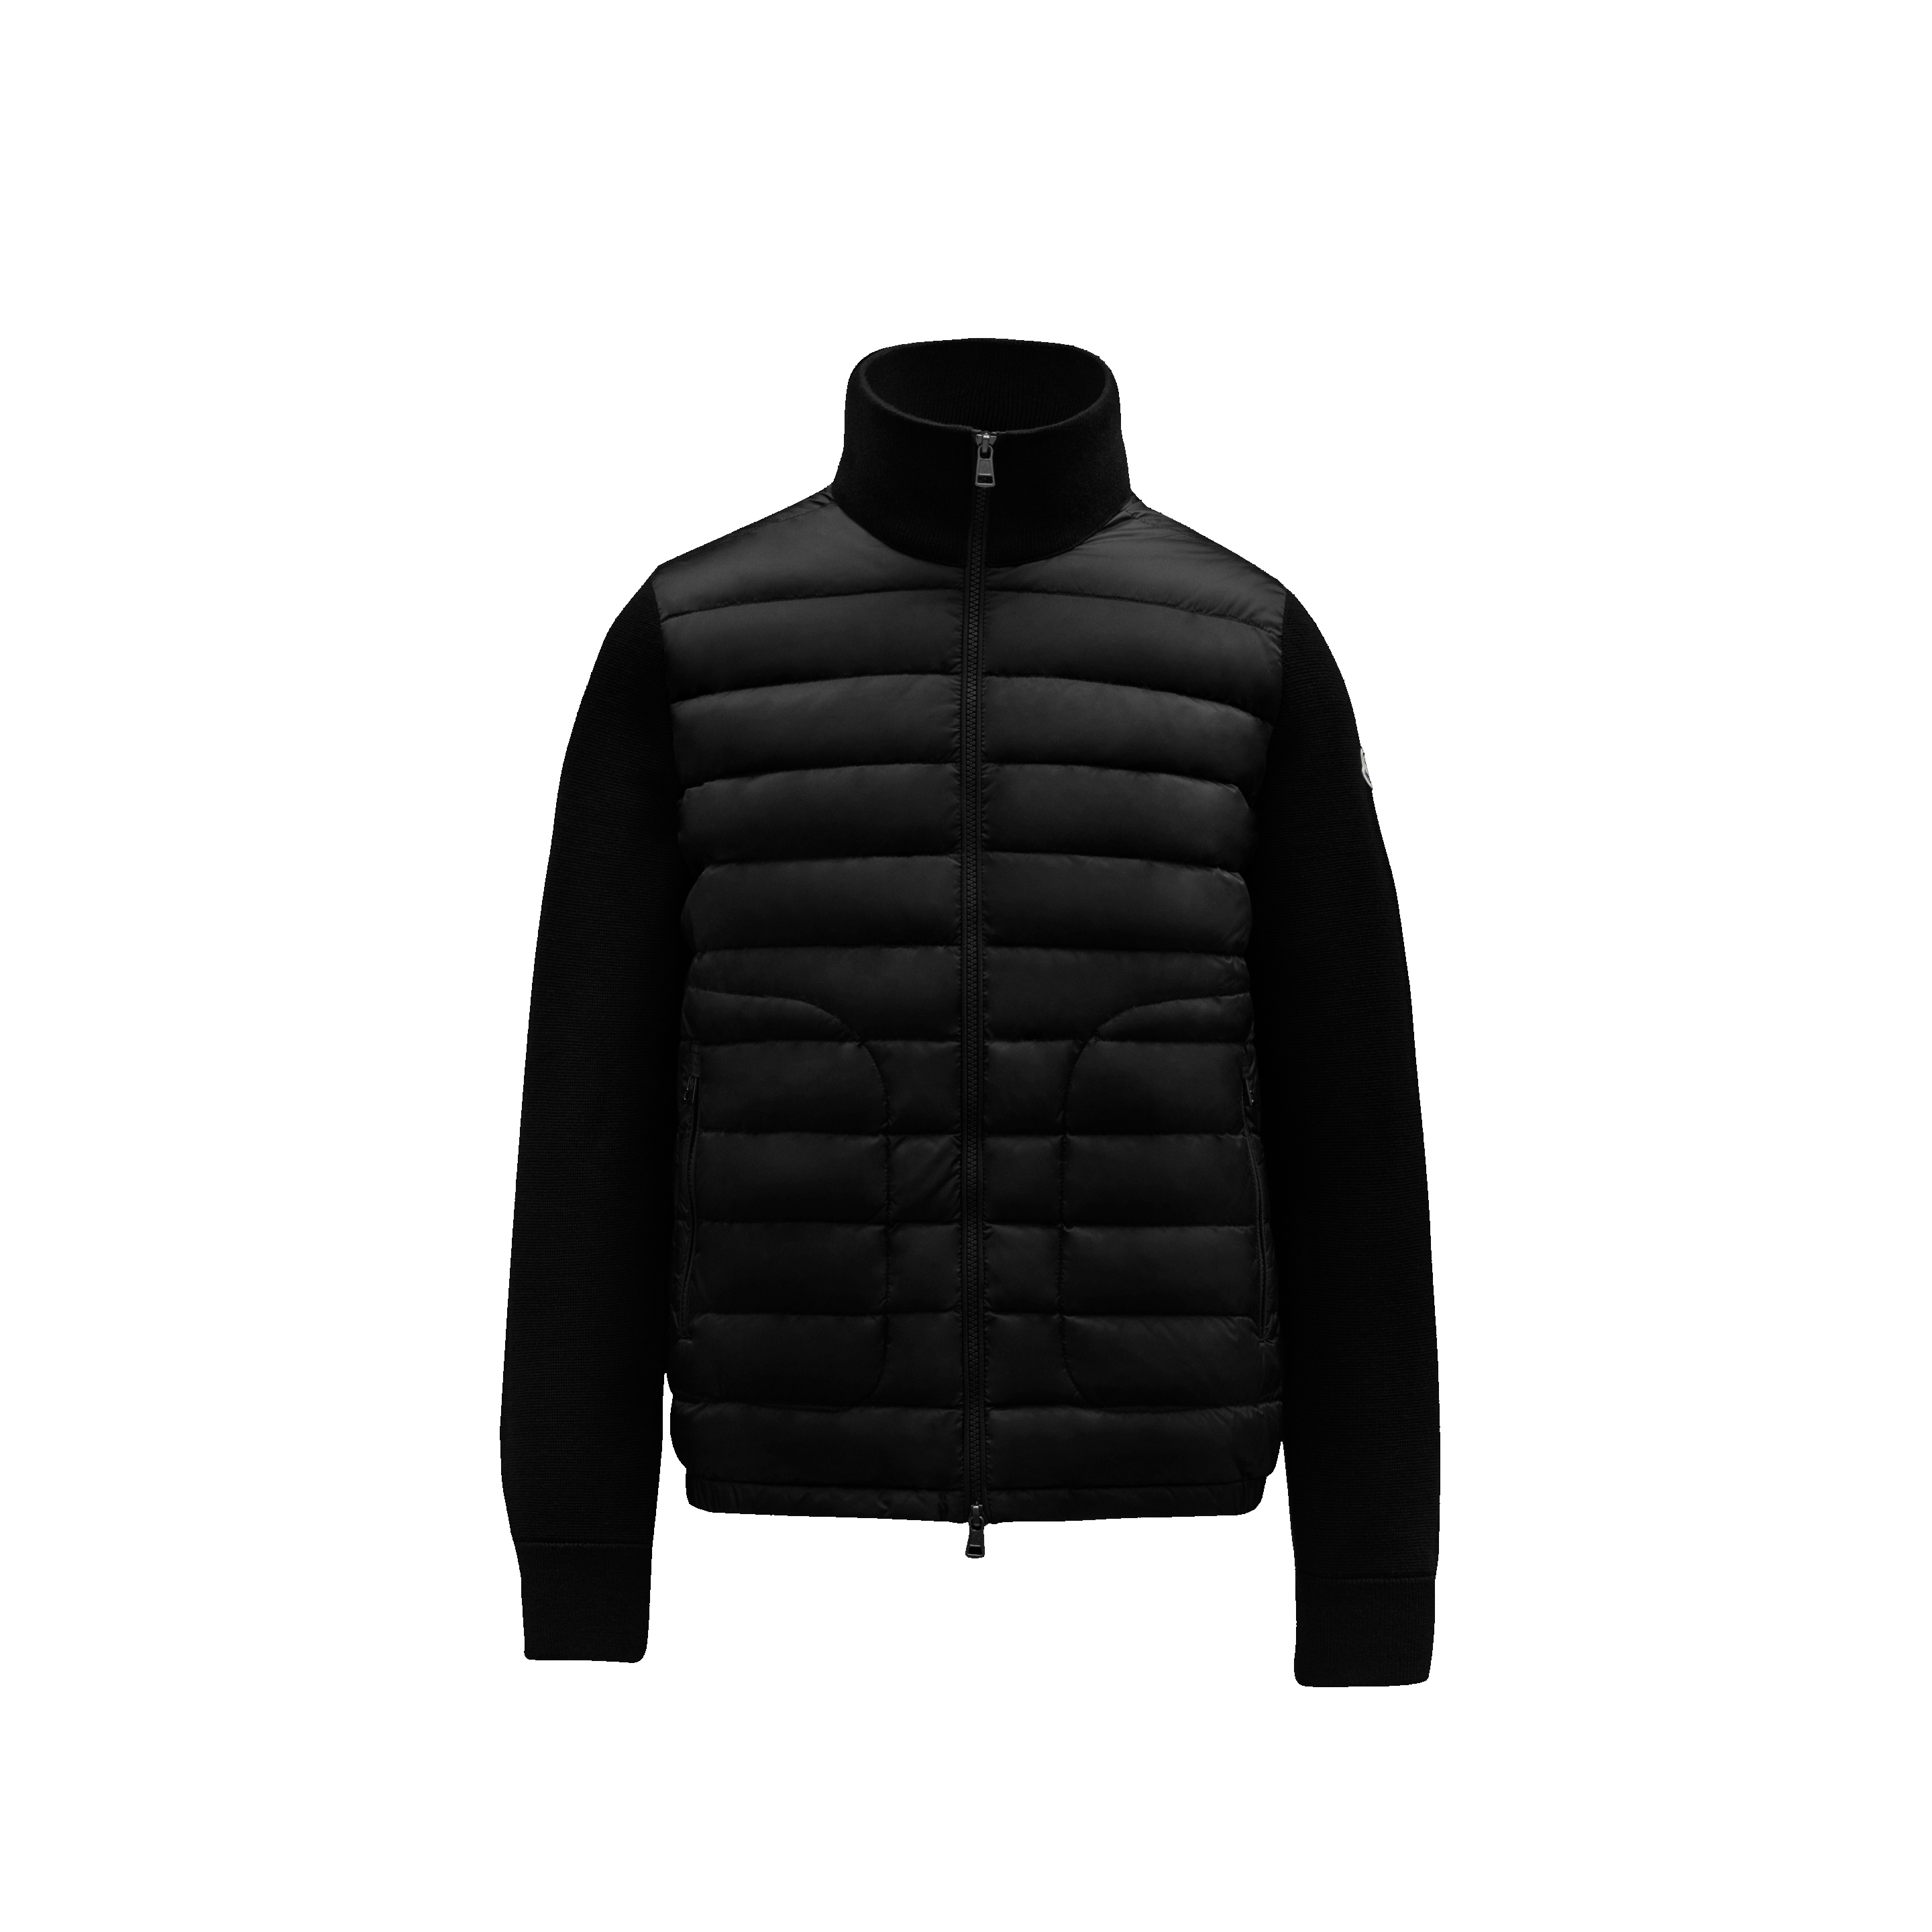 Moncler Collection Padded Wool Cardigan, Men, Black, Size: Xxl